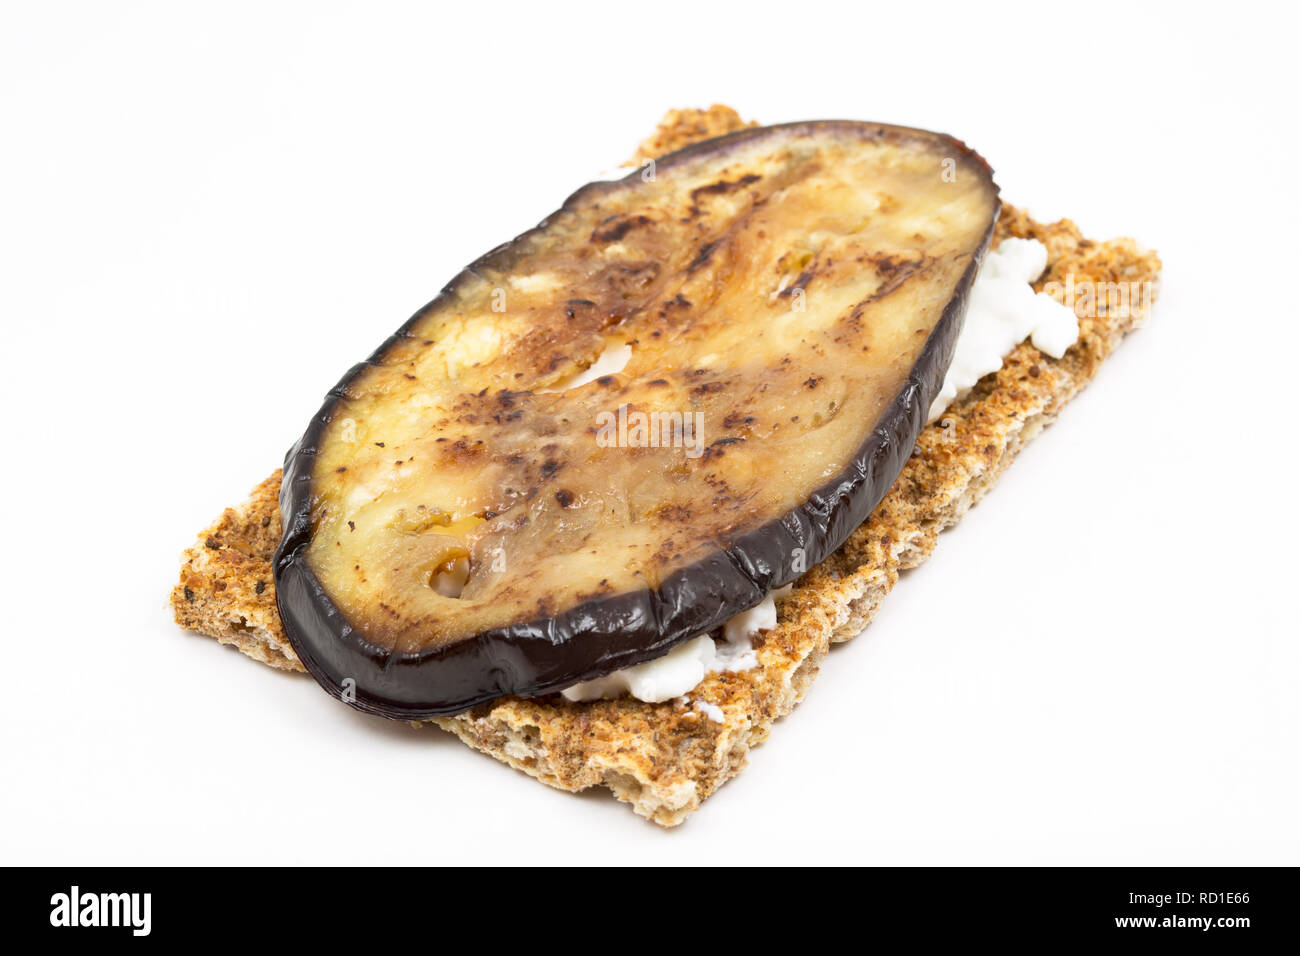 Fat free cottage cheese, spread on a rye bread cracker and topped with fried sliced aubergine as part of a weight loss programme. Dorset England UK GB Stock Photo